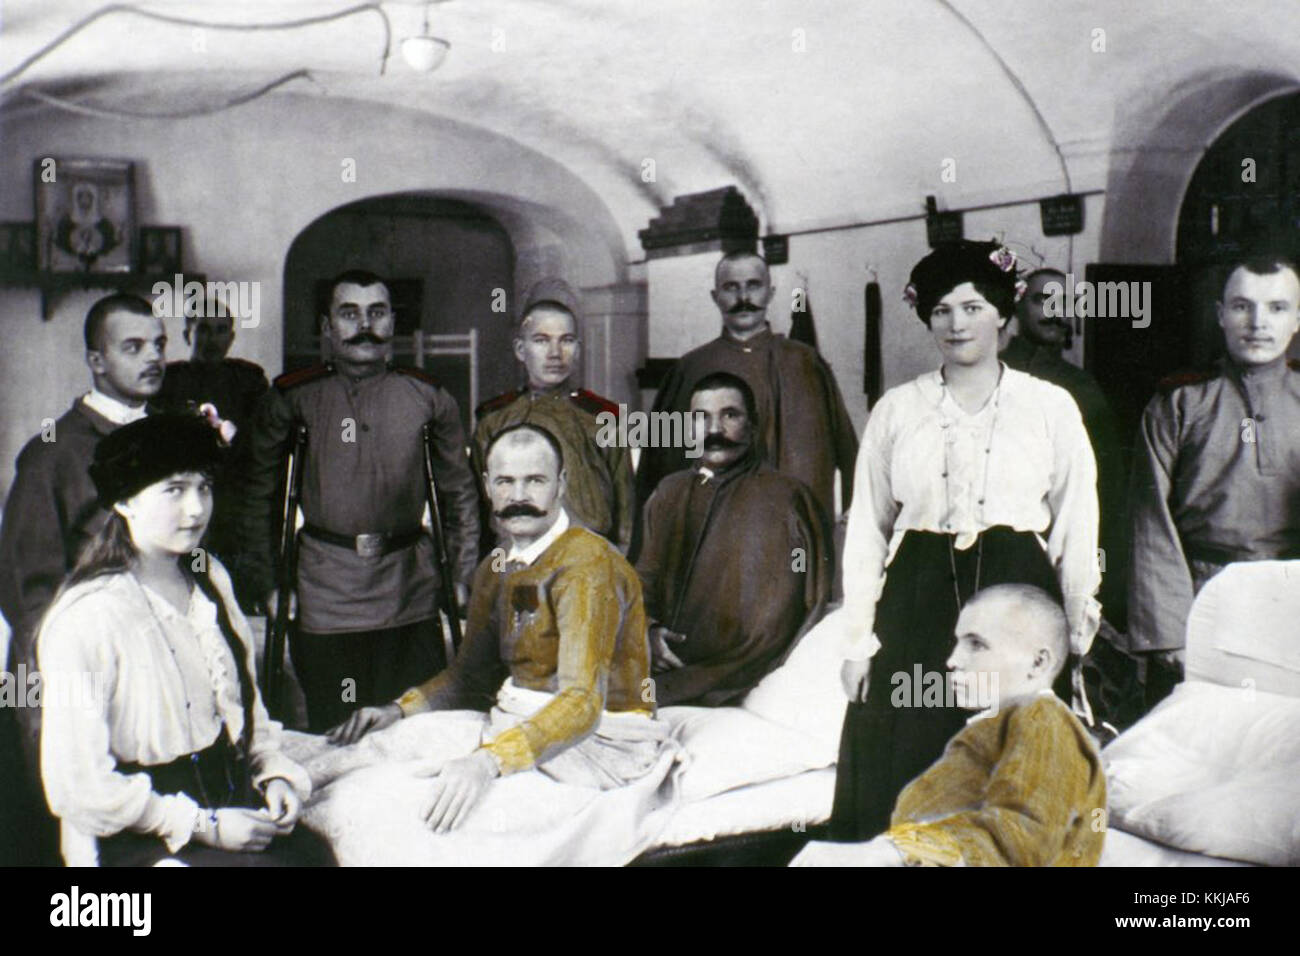 UNDATED:  Tsar Nicholas II daughters Anastasia (born 1901) and Maria Romanov (born in 1899) visit wounded soldiers in hospital during World War I. The series of the unique pictures were taken by the Tsar Nicholas II himself or people close to the royal family. They were realized in 1915-1916, the most terrible years of World War I.  Nicholas II was an insatiable photographer. He took special care of pictures, filed them with care in numerous albums. He passed down his love for photography to Maria, his third daughter, who is responsible for colouring most of the pictures.  (Photo: Laski Diffus Stock Photo